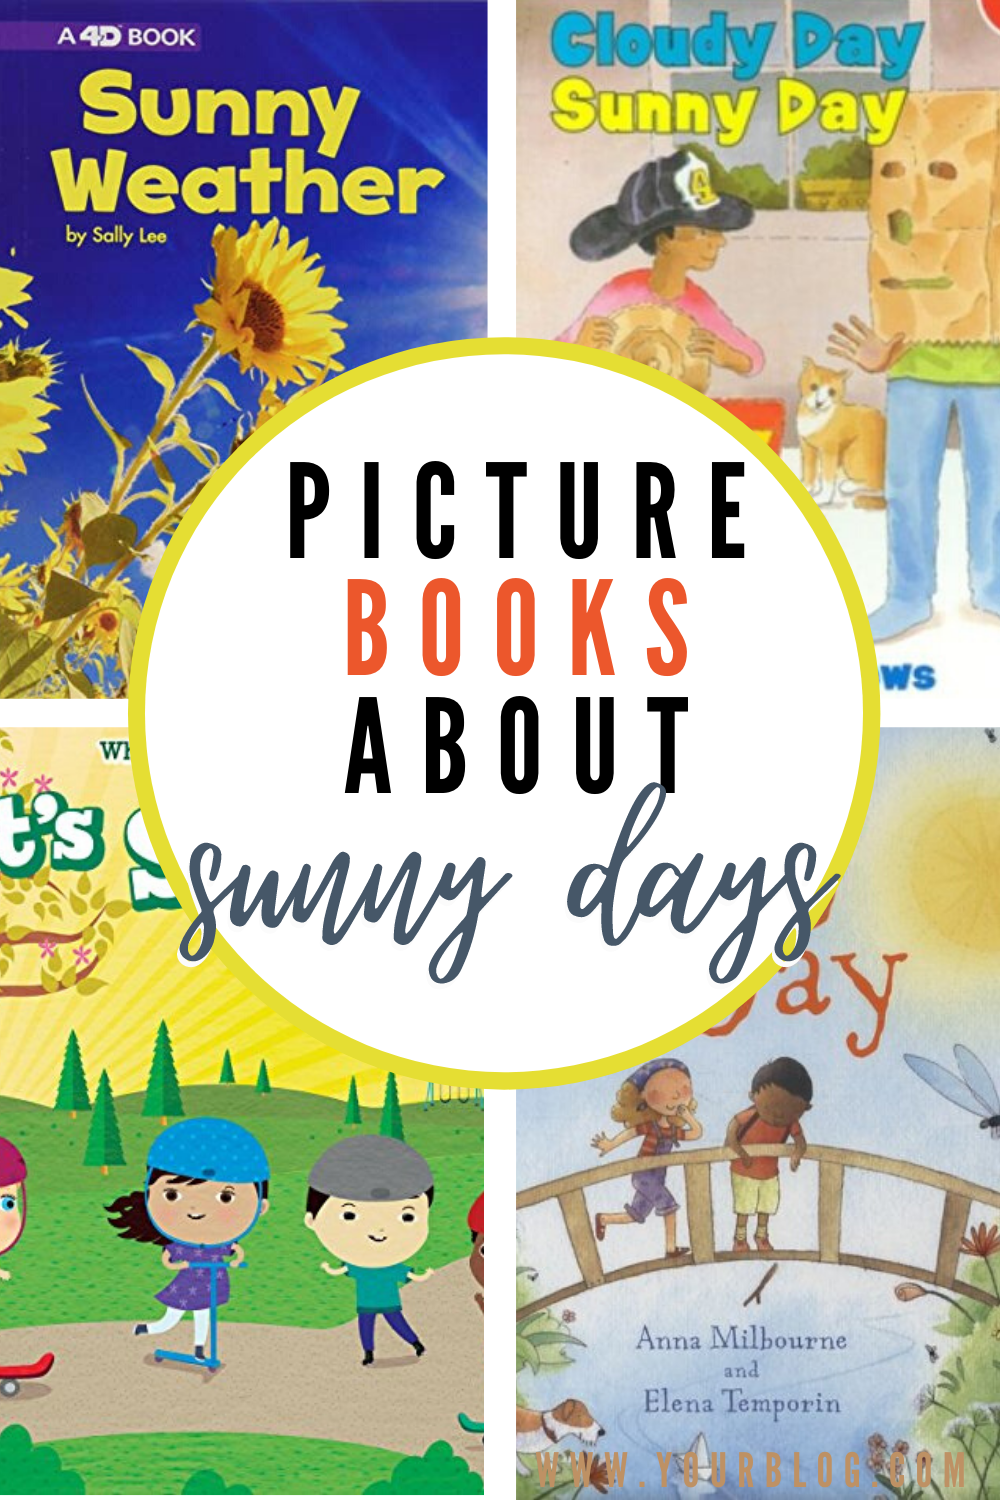 More Than 25 Engaging Preschool Books About Weather